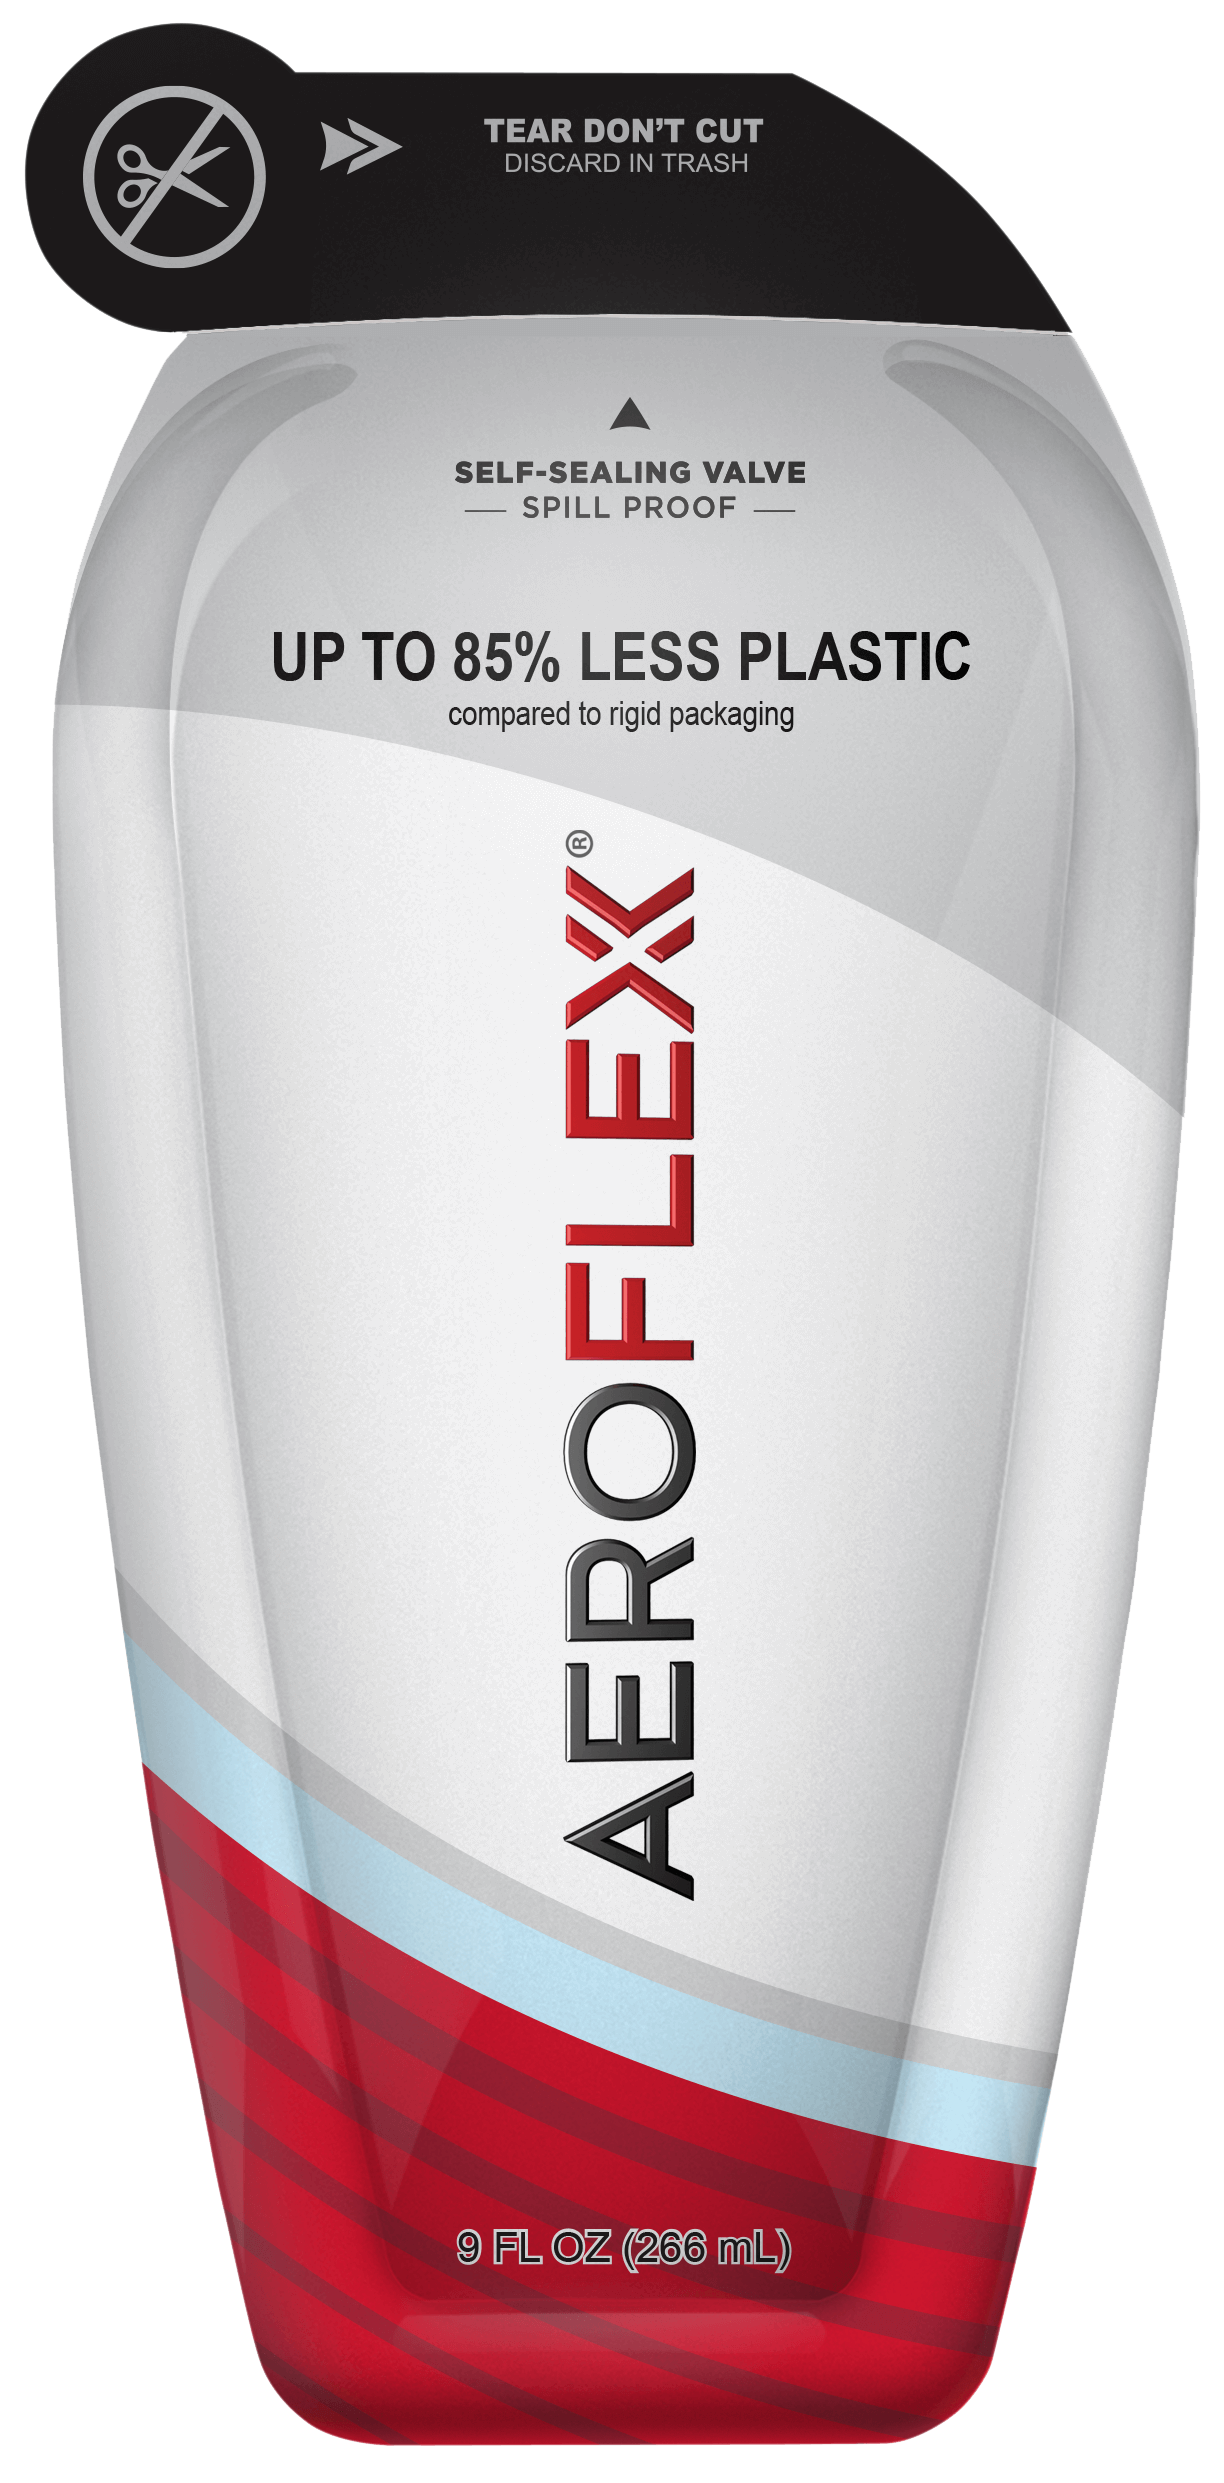 AeroFlexx is Recognized for the Best Eco-Friendly Liquid Packaging Solution